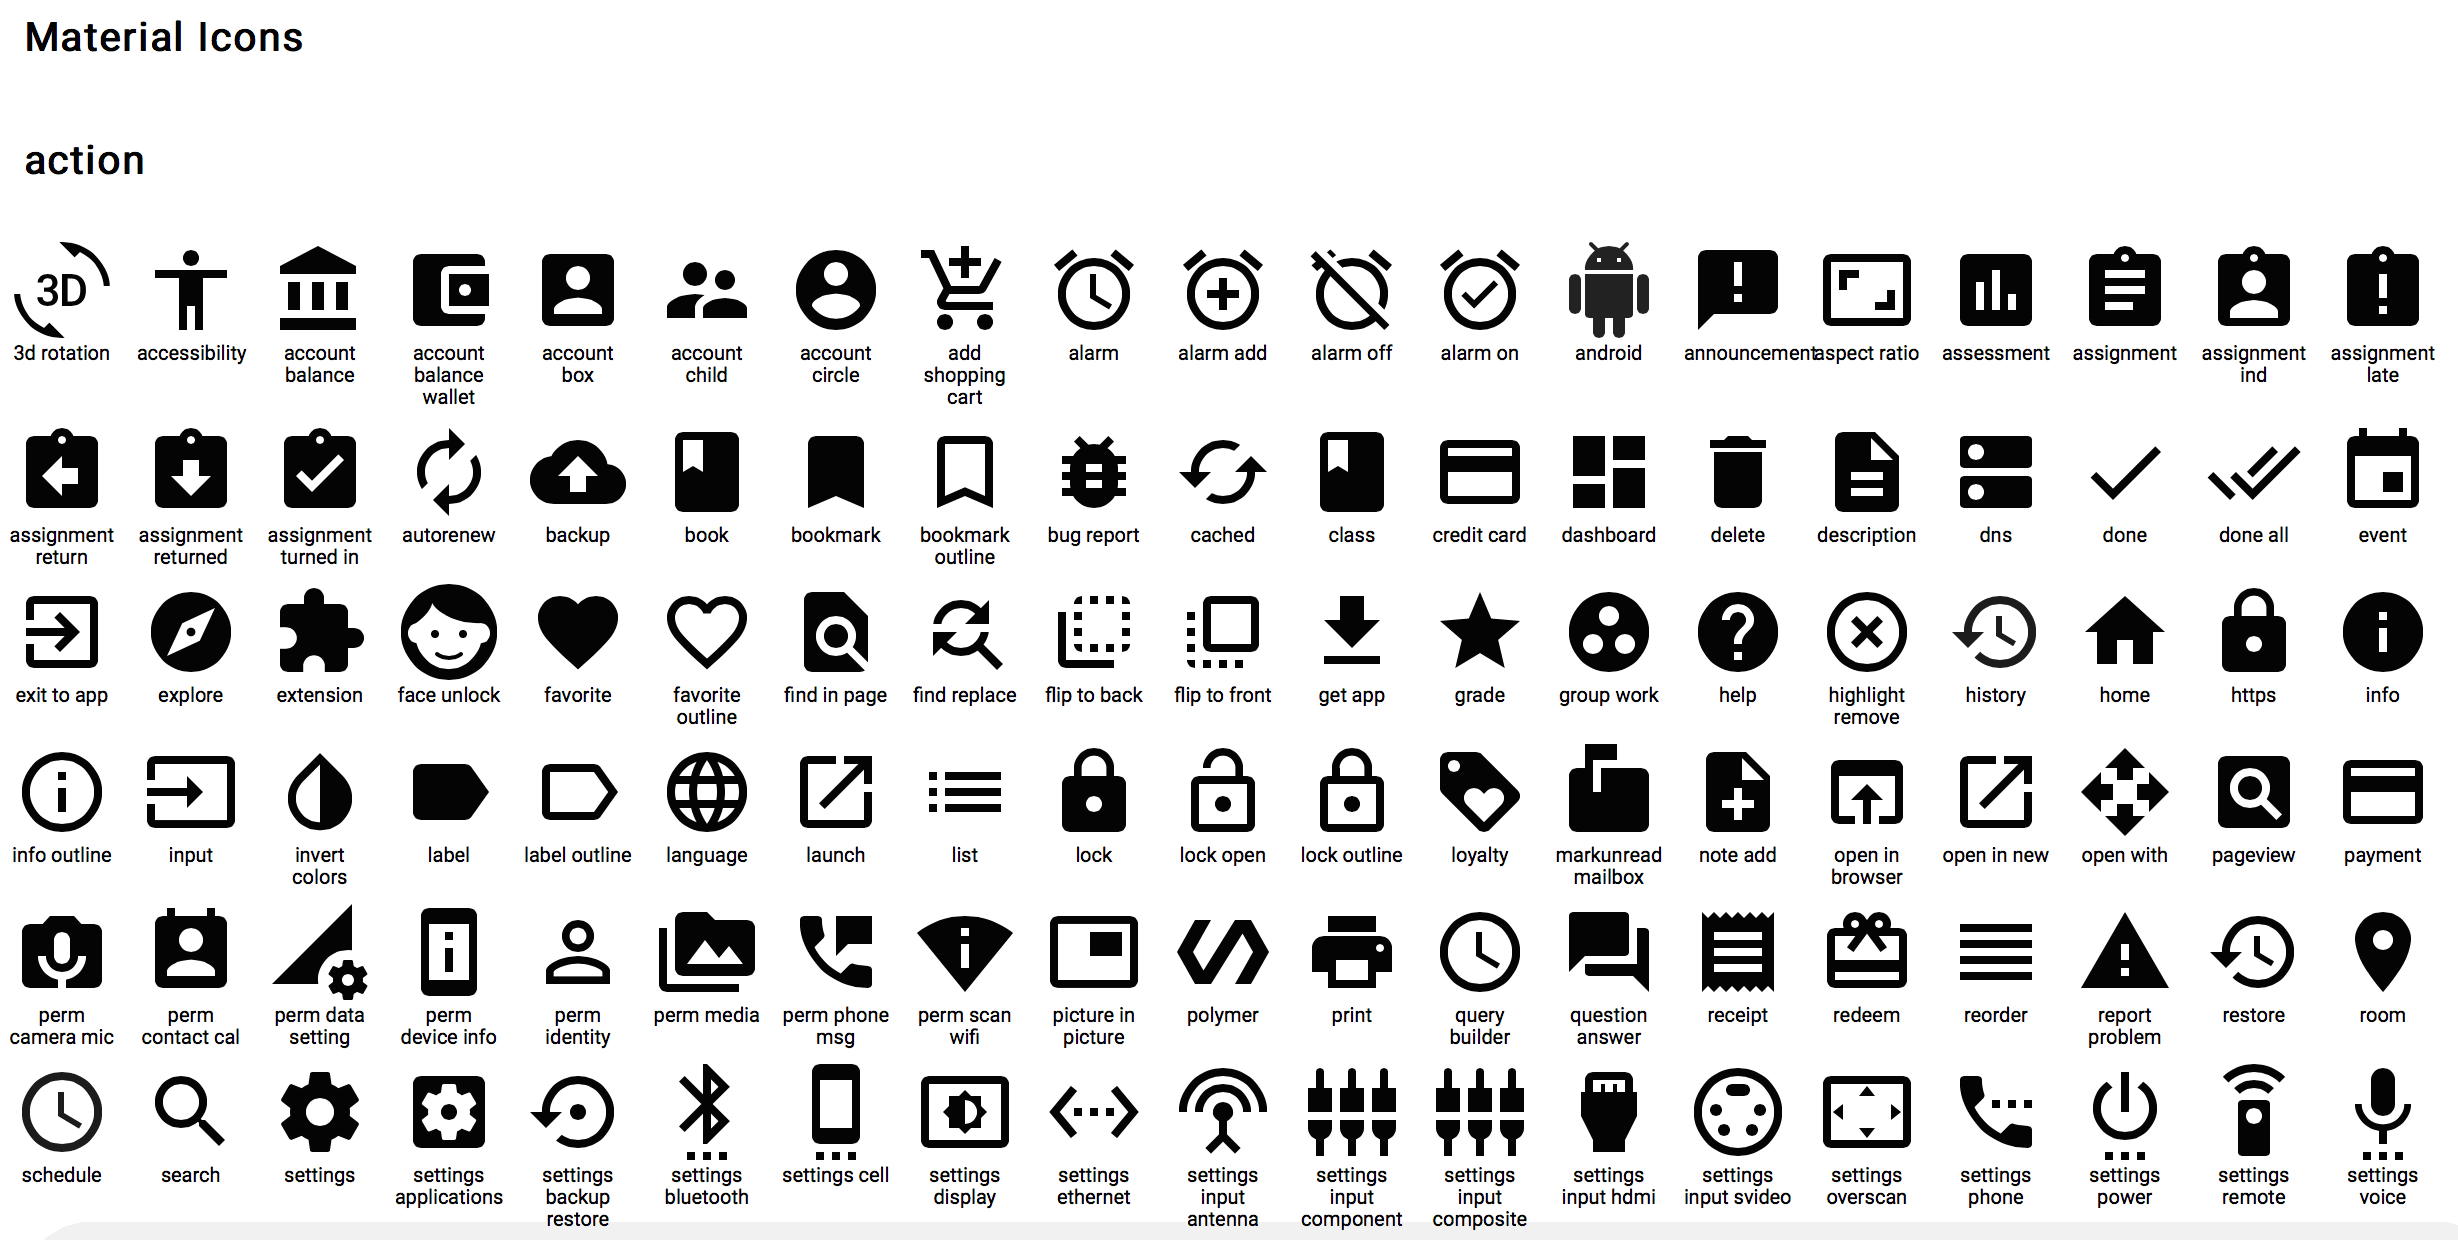 Android Material Design icons